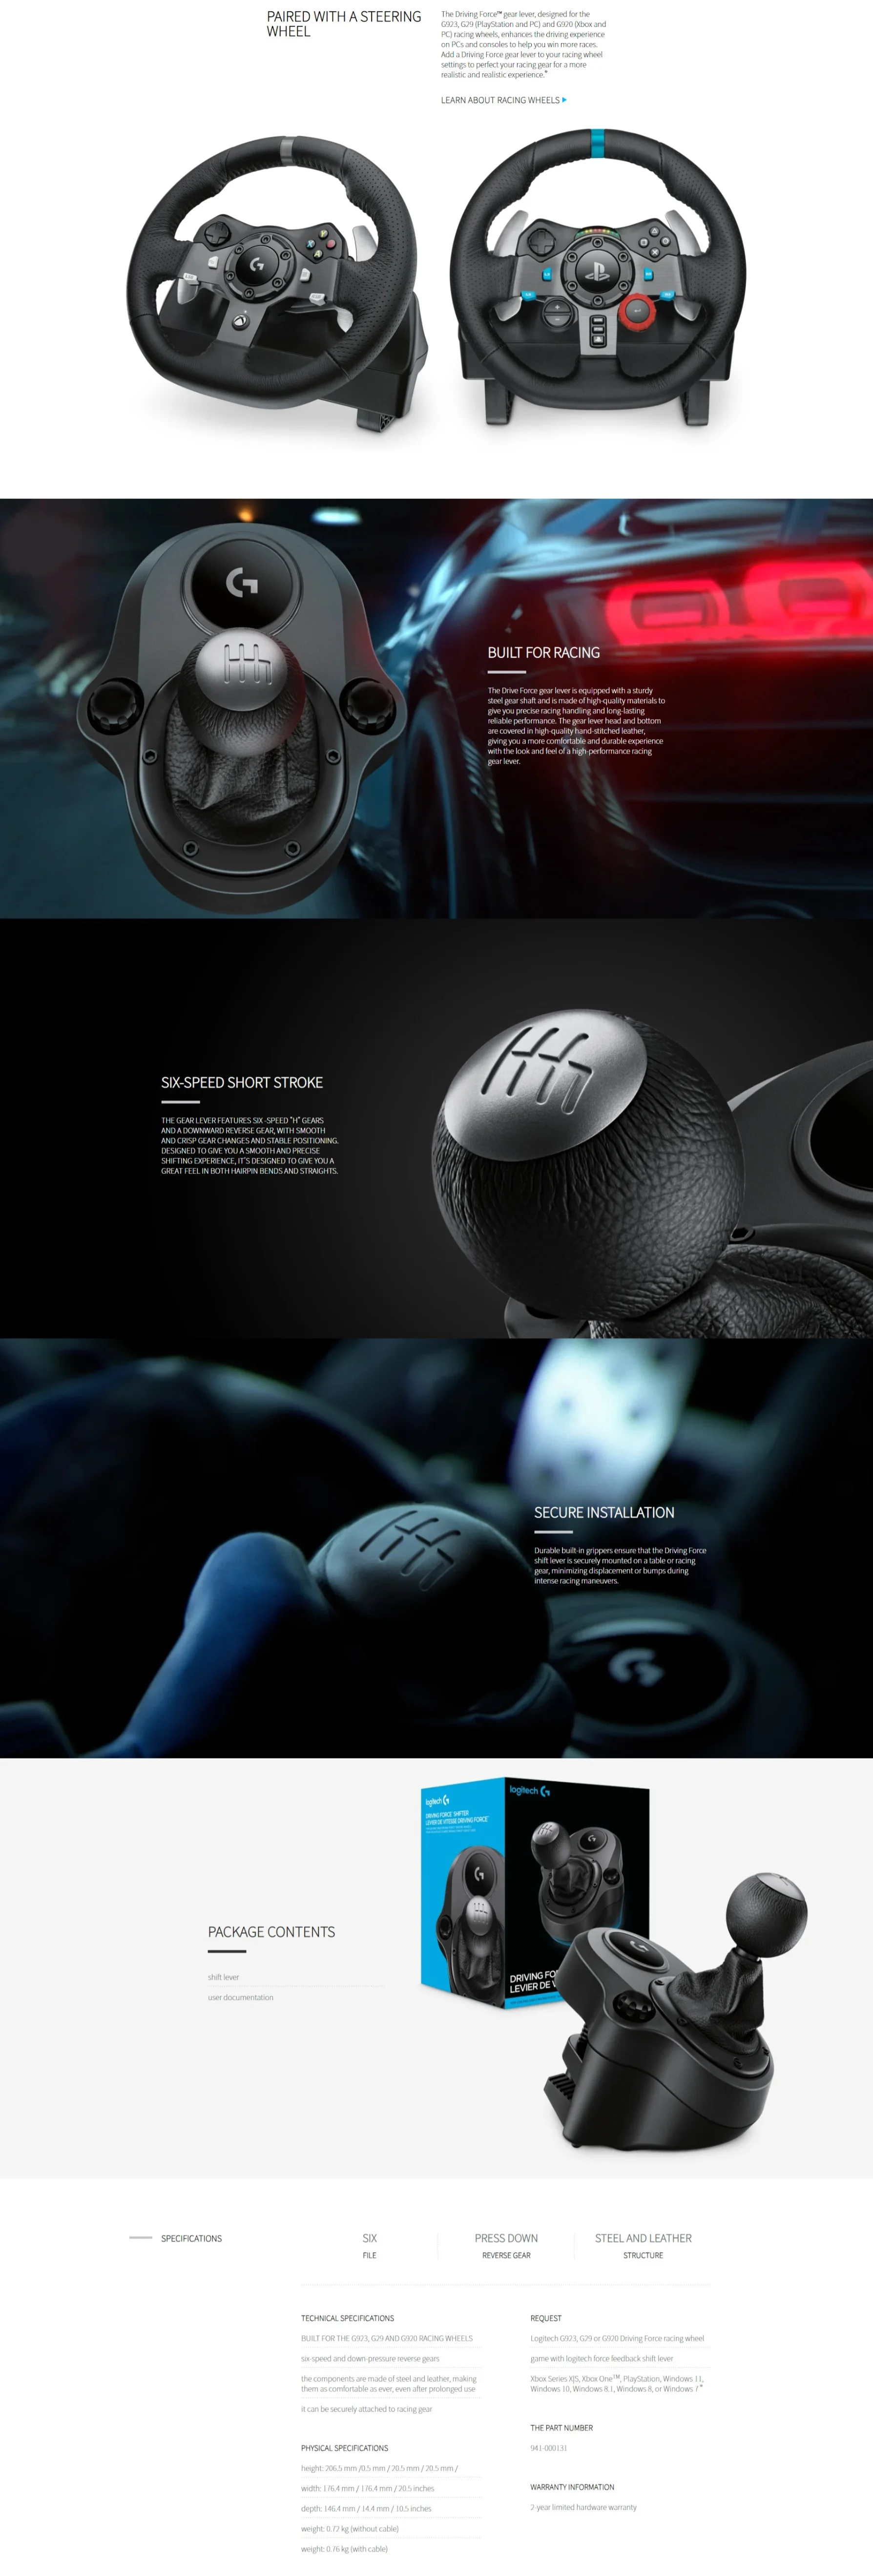 Logitech G Gaming Driving Force Shifter Compatible with G29 and